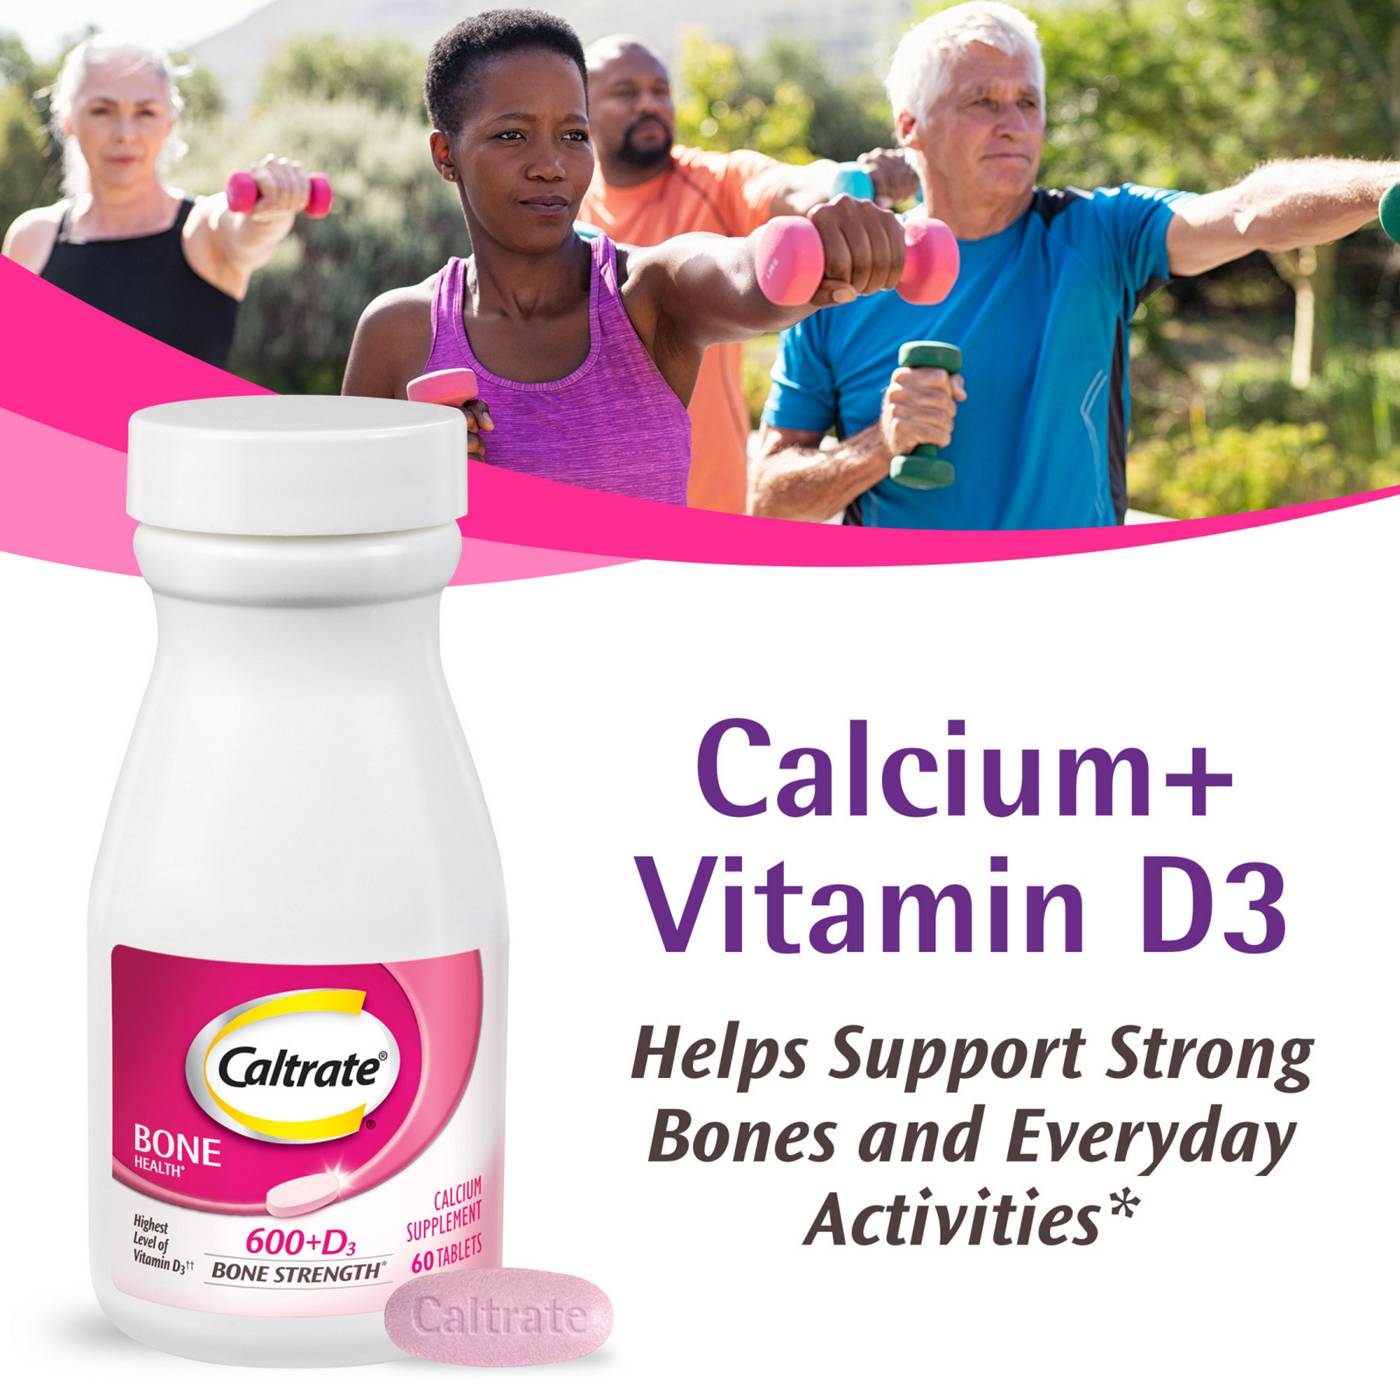 Caltrate 600+D3 Bone Strength Calcium Supplement Tablets; image 4 of 5